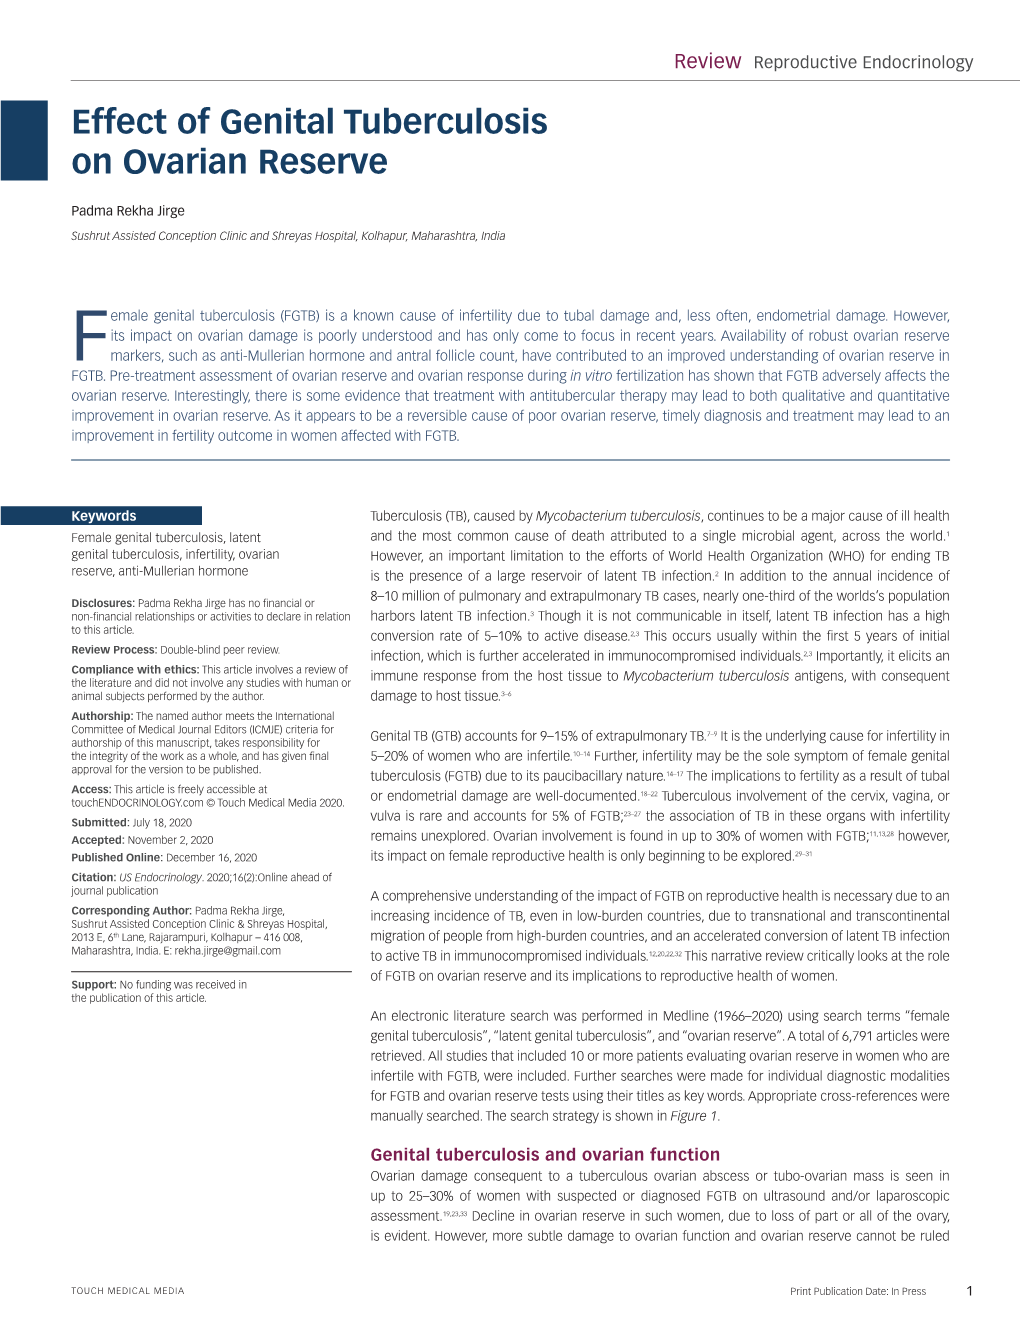 Effect of Genital Tuberculosis on Ovarian Reserve